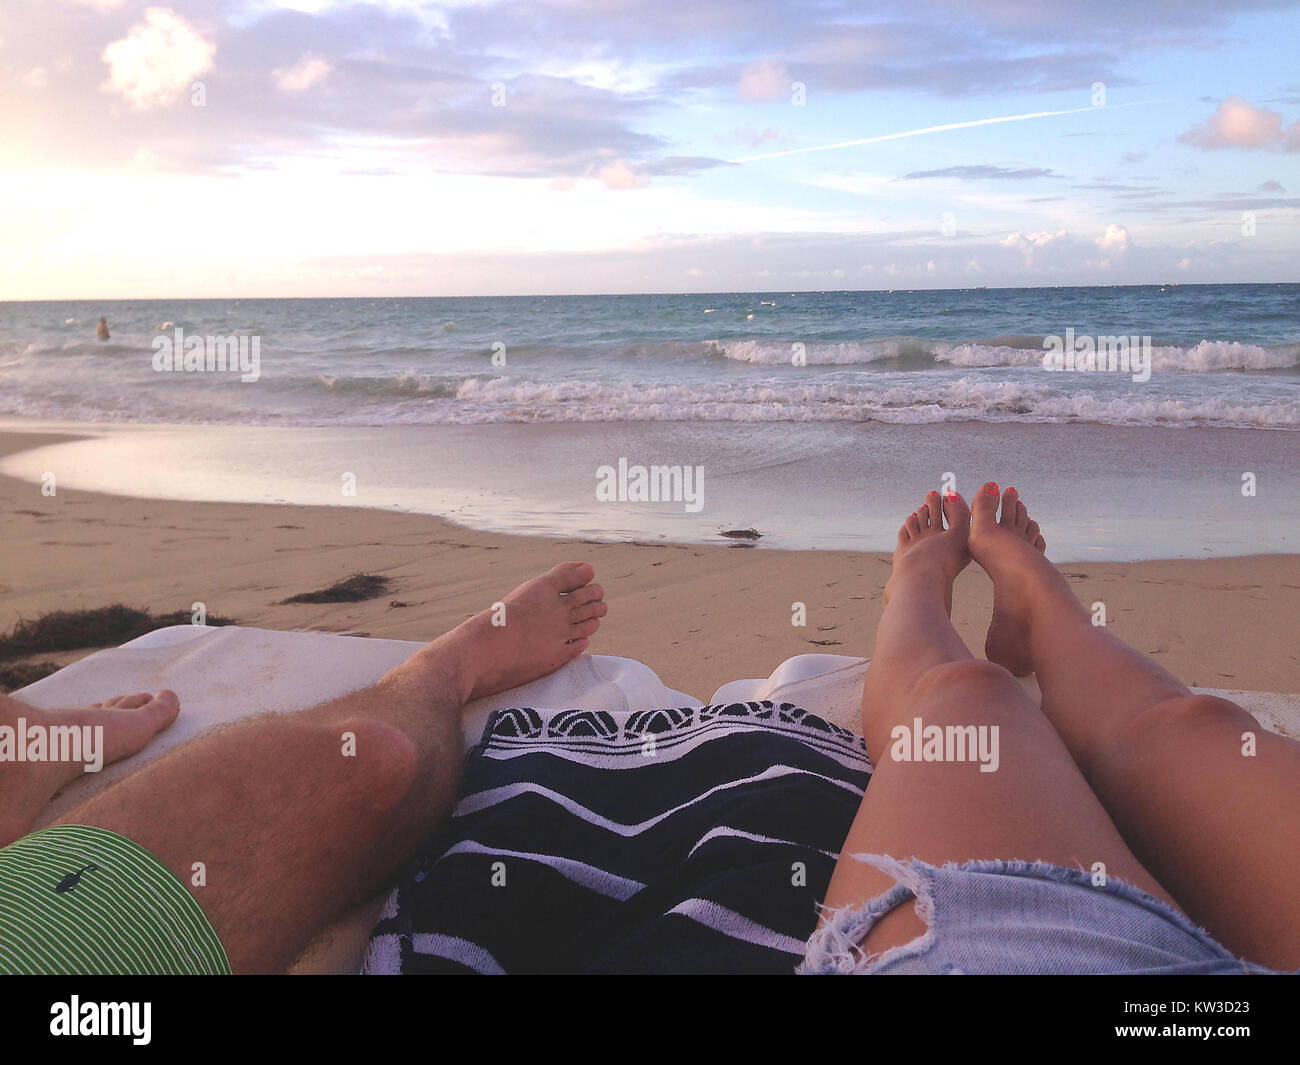 Couple sunbathing and relaxing on a beach Stock Photo